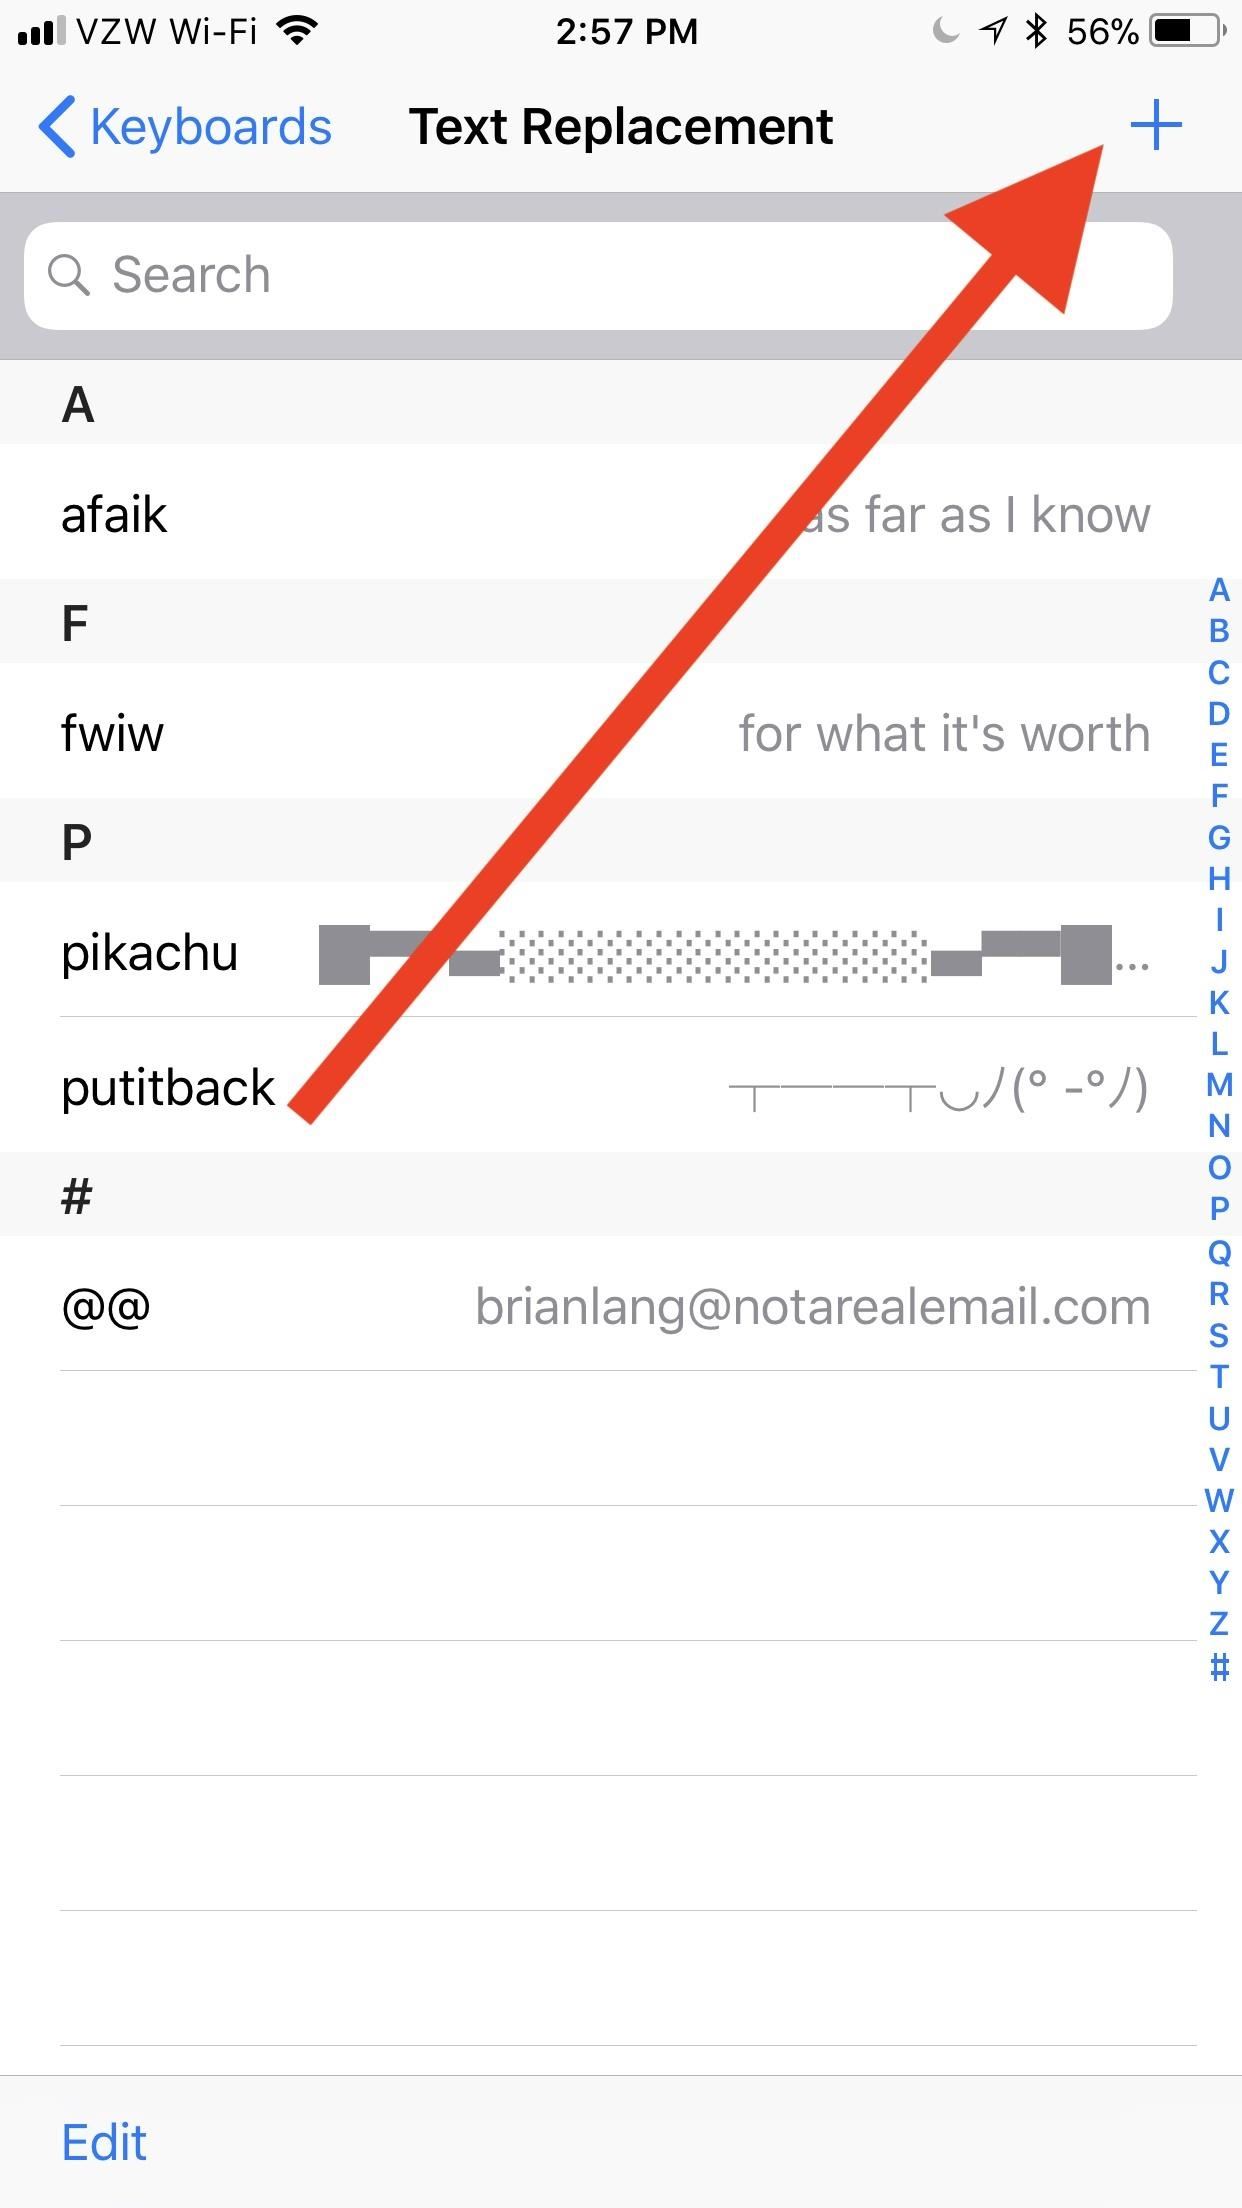 How to Use Keyboard Shortcuts to Type Out Emoticons Faster on Your iPhone